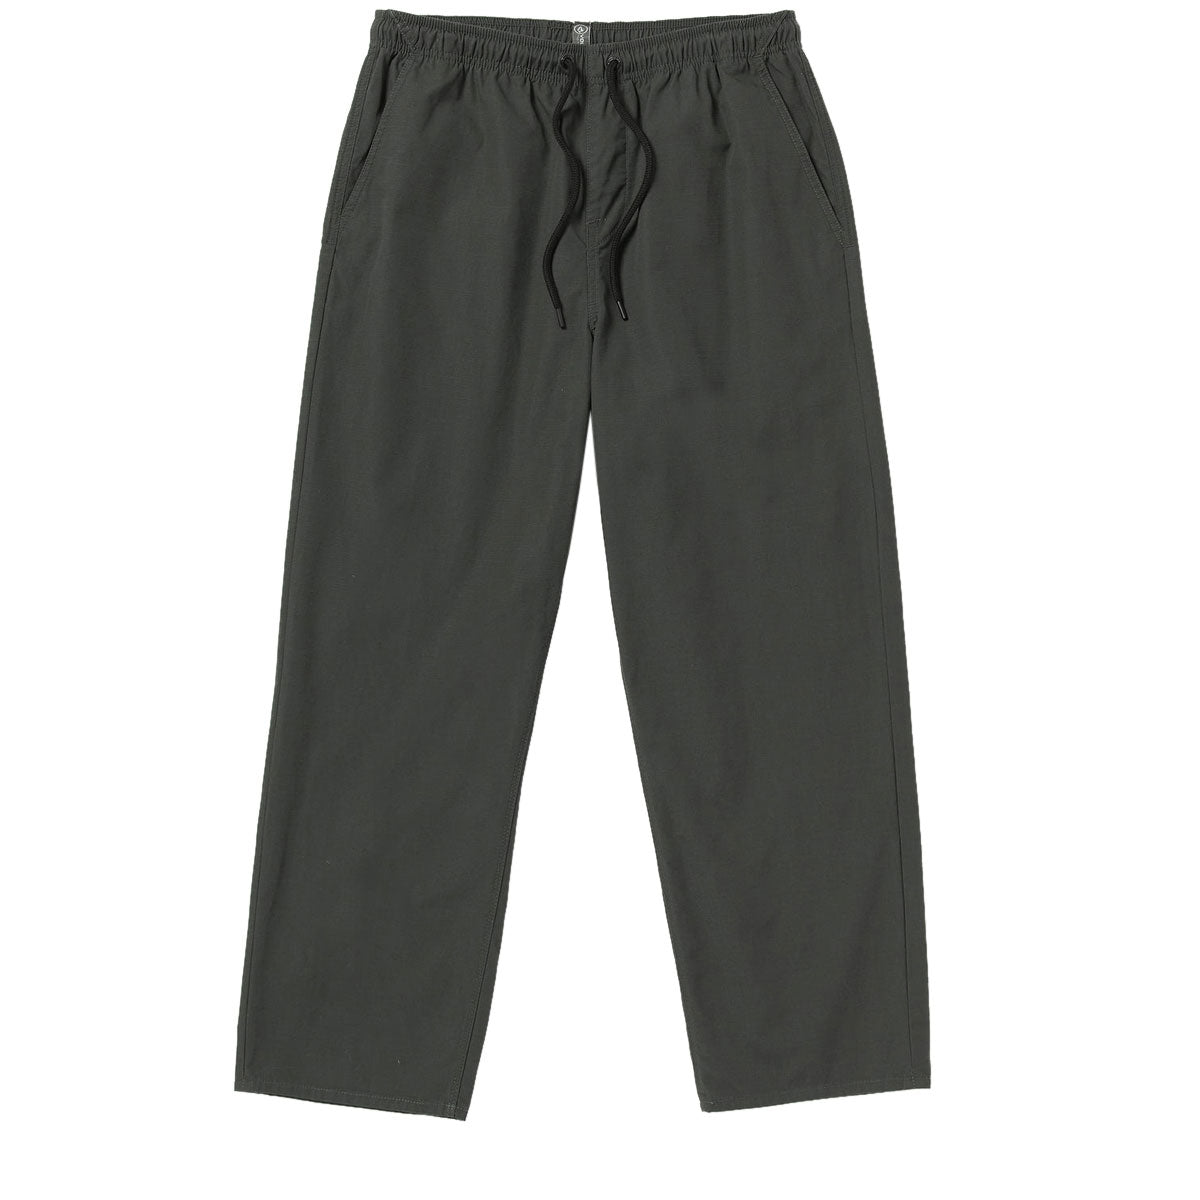 Volcom Outer Spaced Casual Pants - Stealth image 1